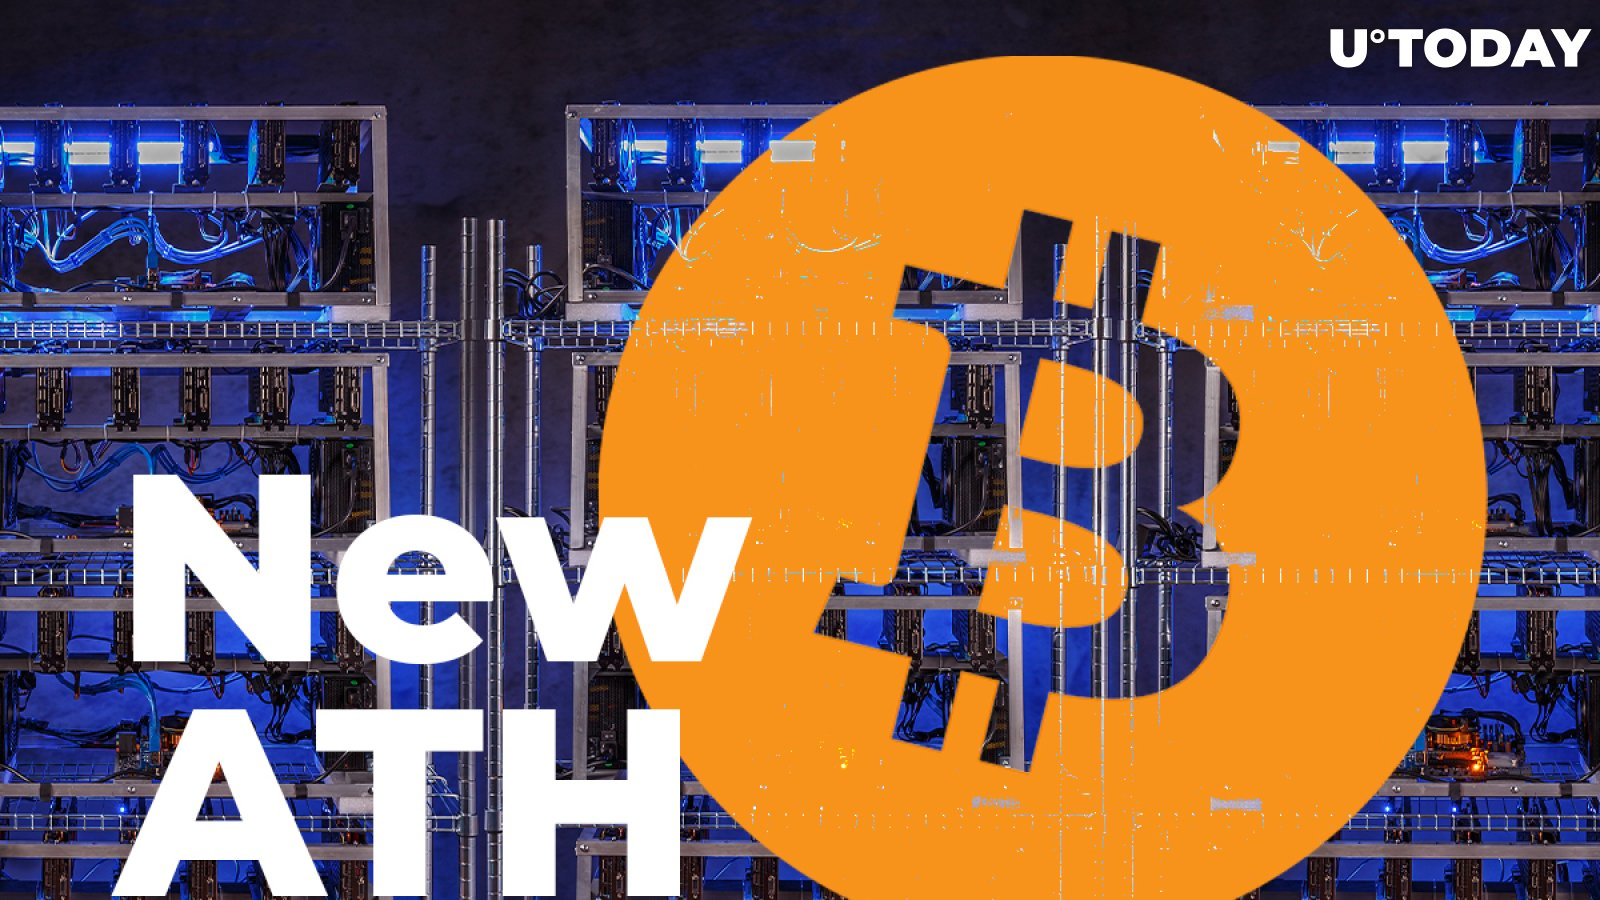 Bitcoin Mean Hash Rate Soars to New ATH as Miners Remain Unaffected by Recent BTC Pullback